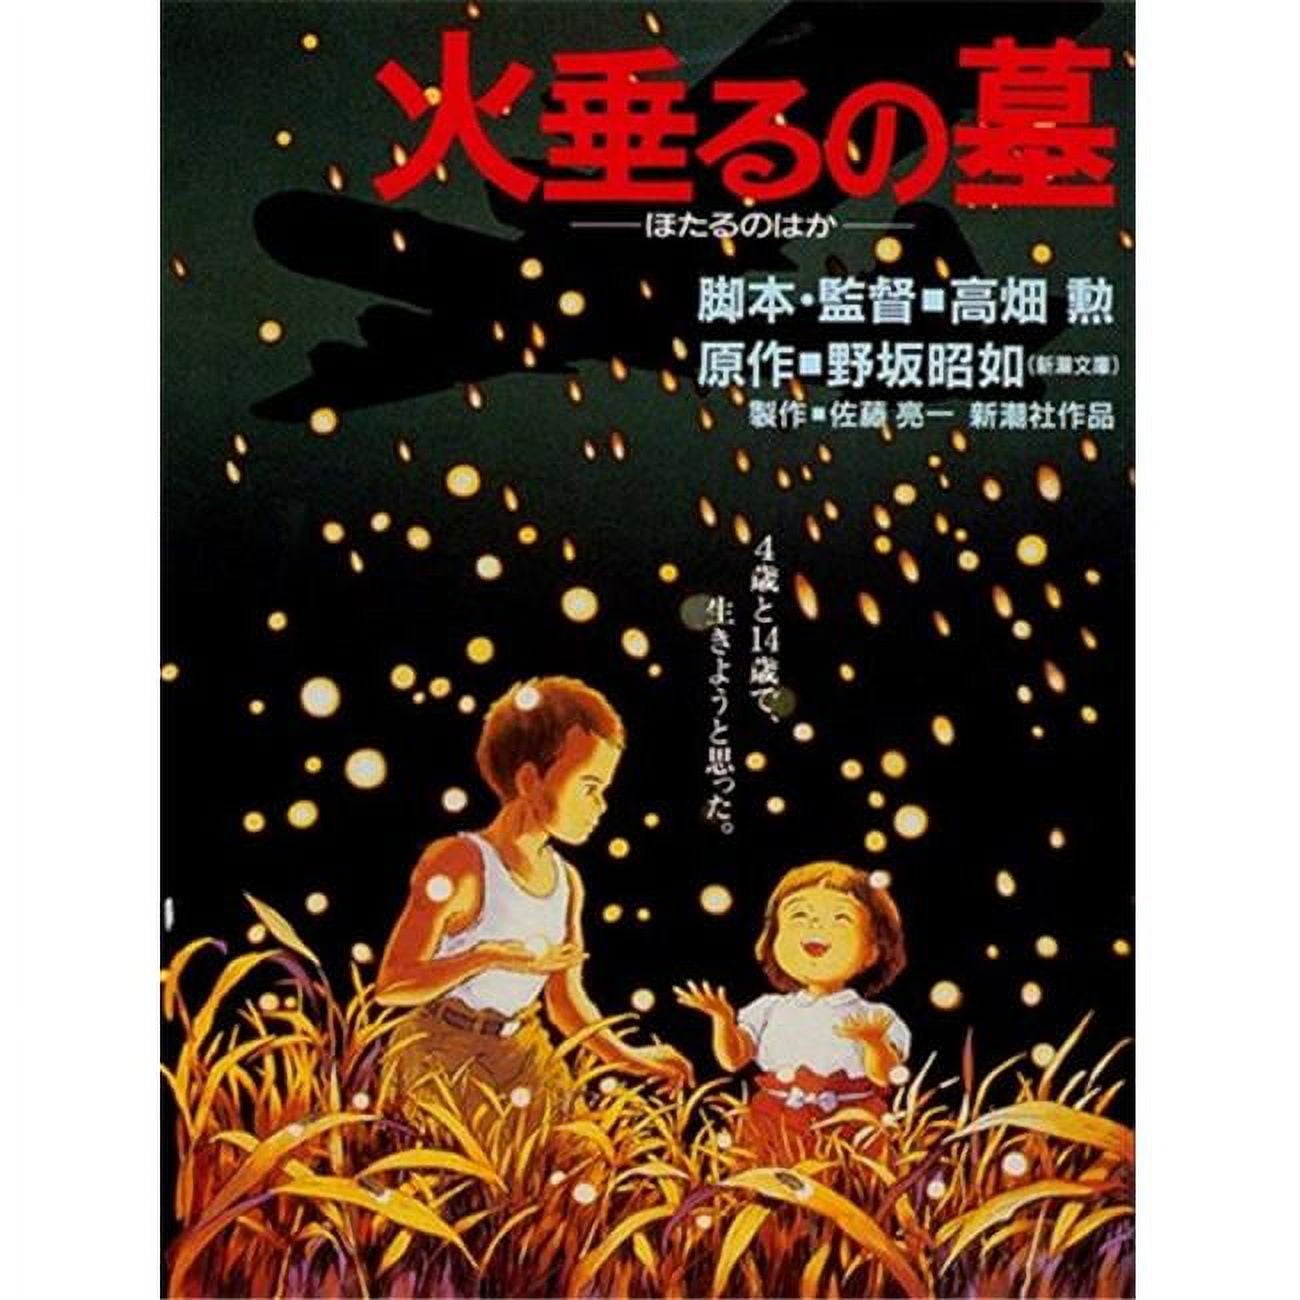 Grave of the Fireflies (Tombstone for Fireflies) Movie Poster (11 x 17) -  Item # MOV502576